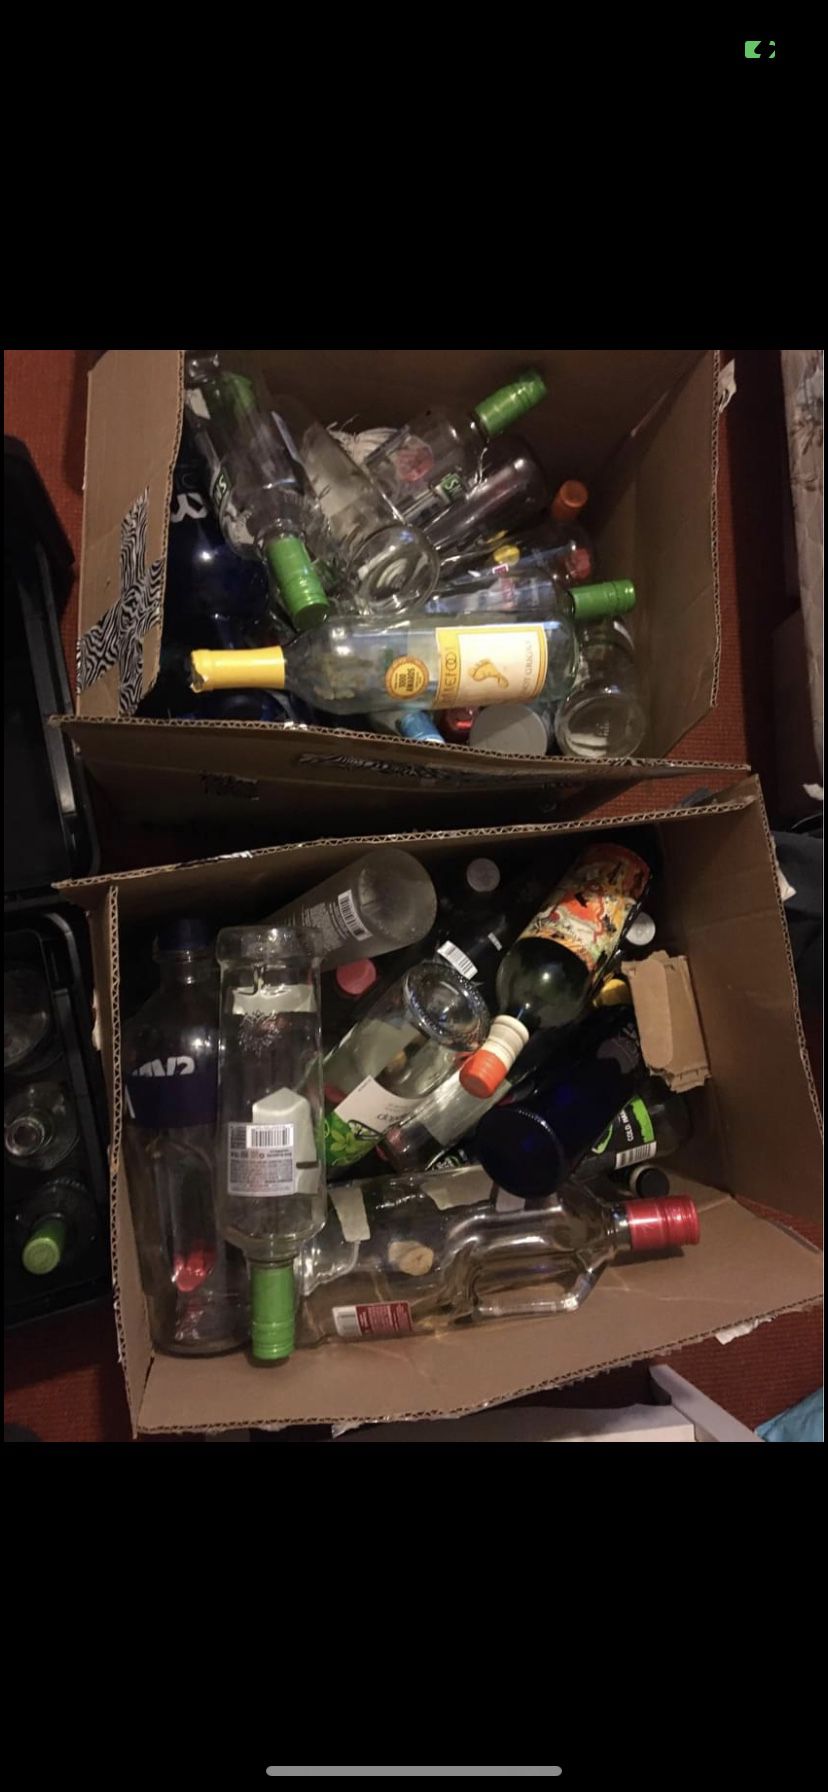 Empty Alcohol Glass Bottles $25 For Box